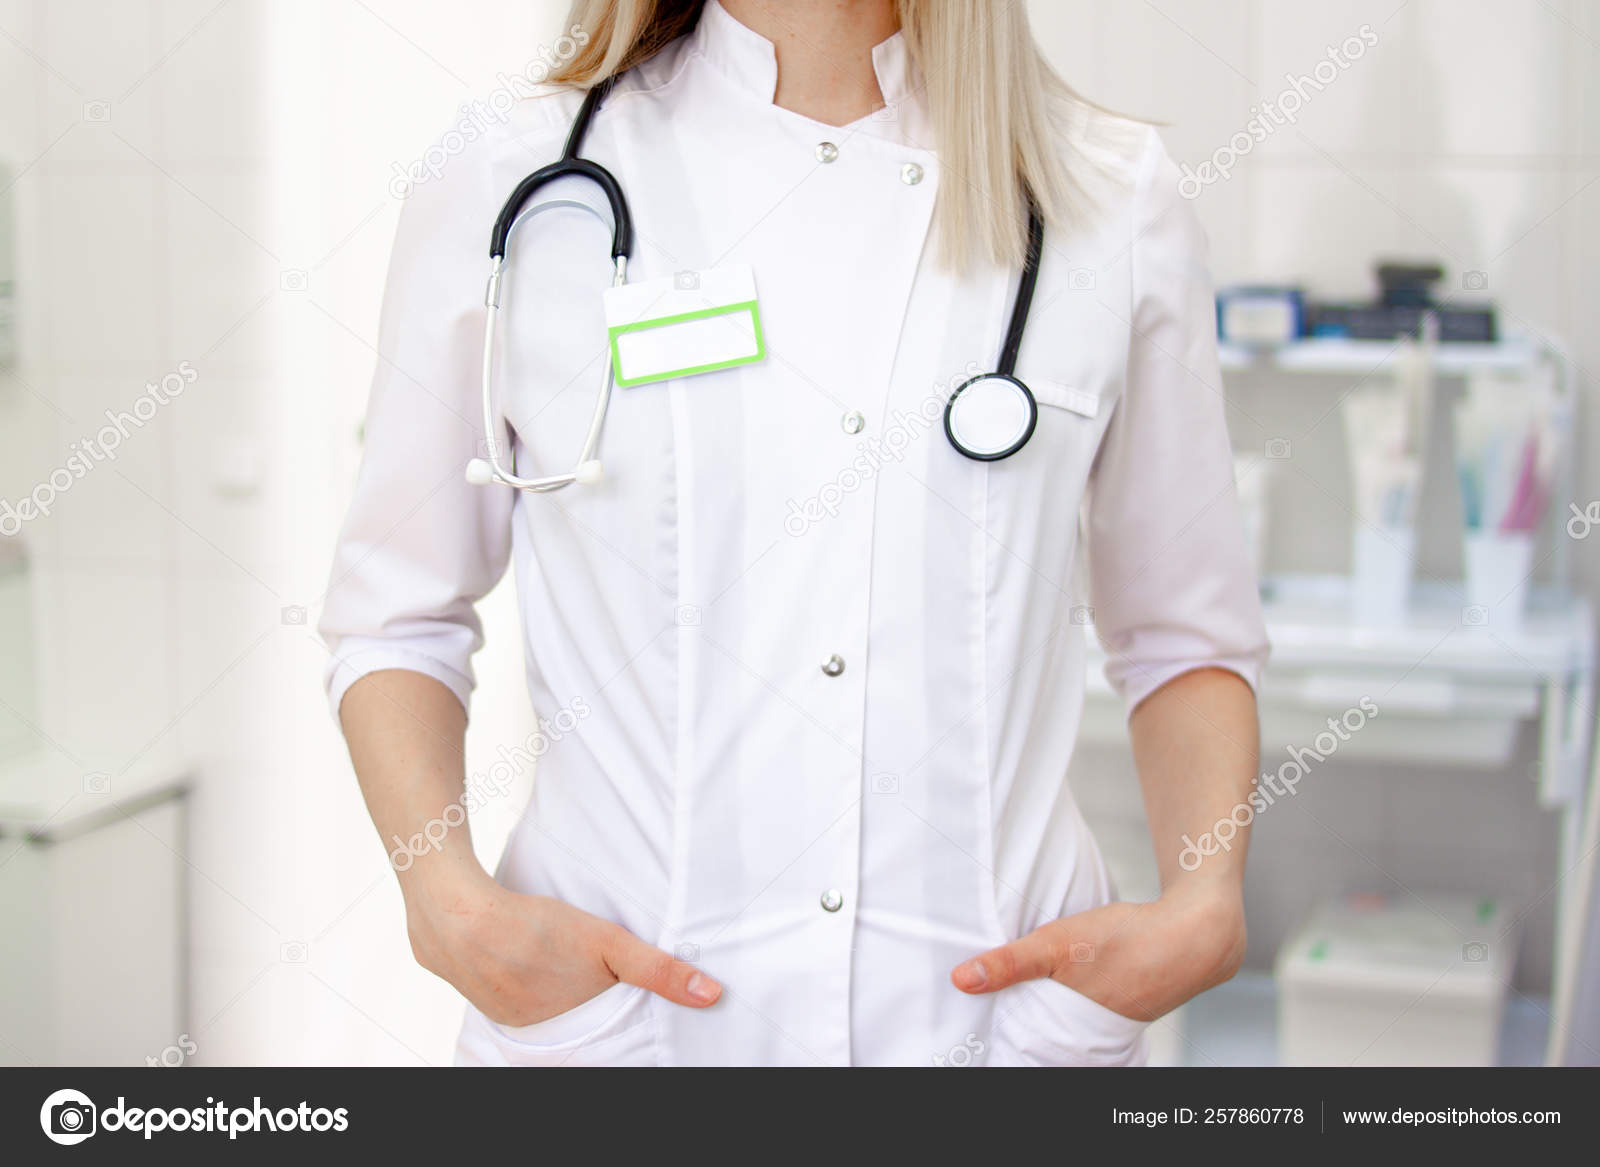 Download Medical Staff Working At The Hospital Cropped Woman Doctor In White Uniform Mockup For Doctor Name Healthcare And Medical Exams Concep Royalty Free Photo Stock Image By C Kuzinanatali 257860778